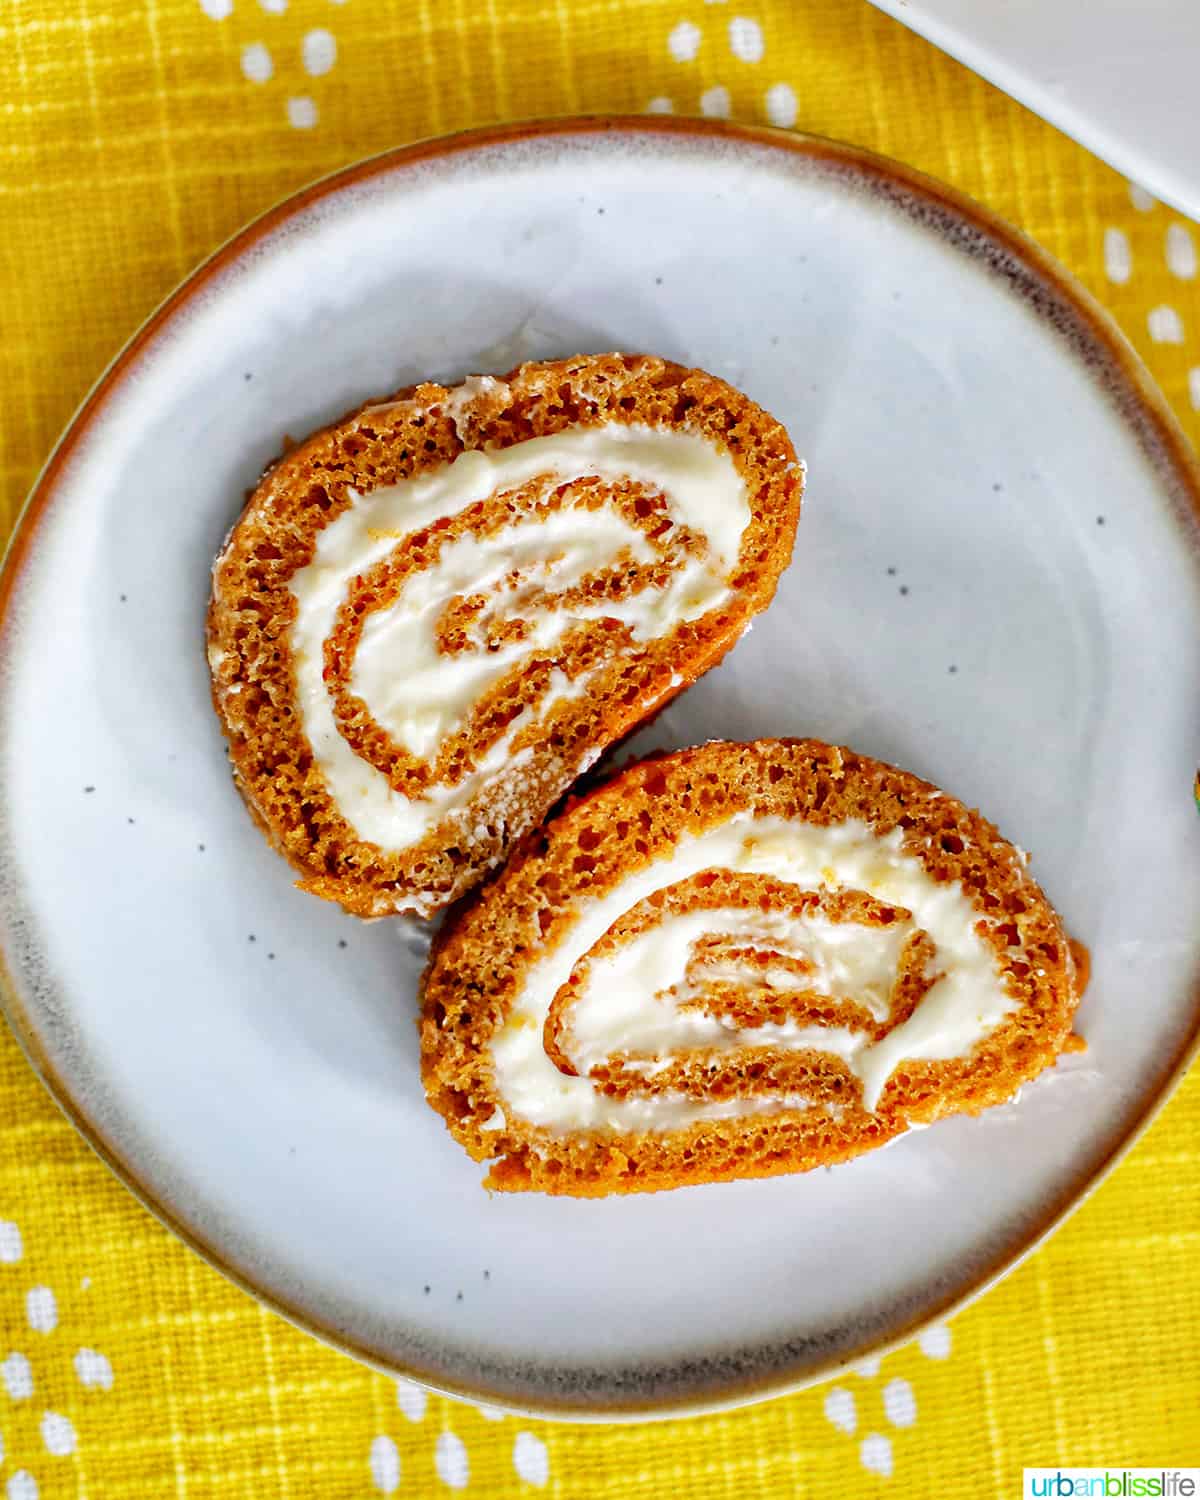 pumpkin cream cheese roll on a plate and yellow tablecloth.